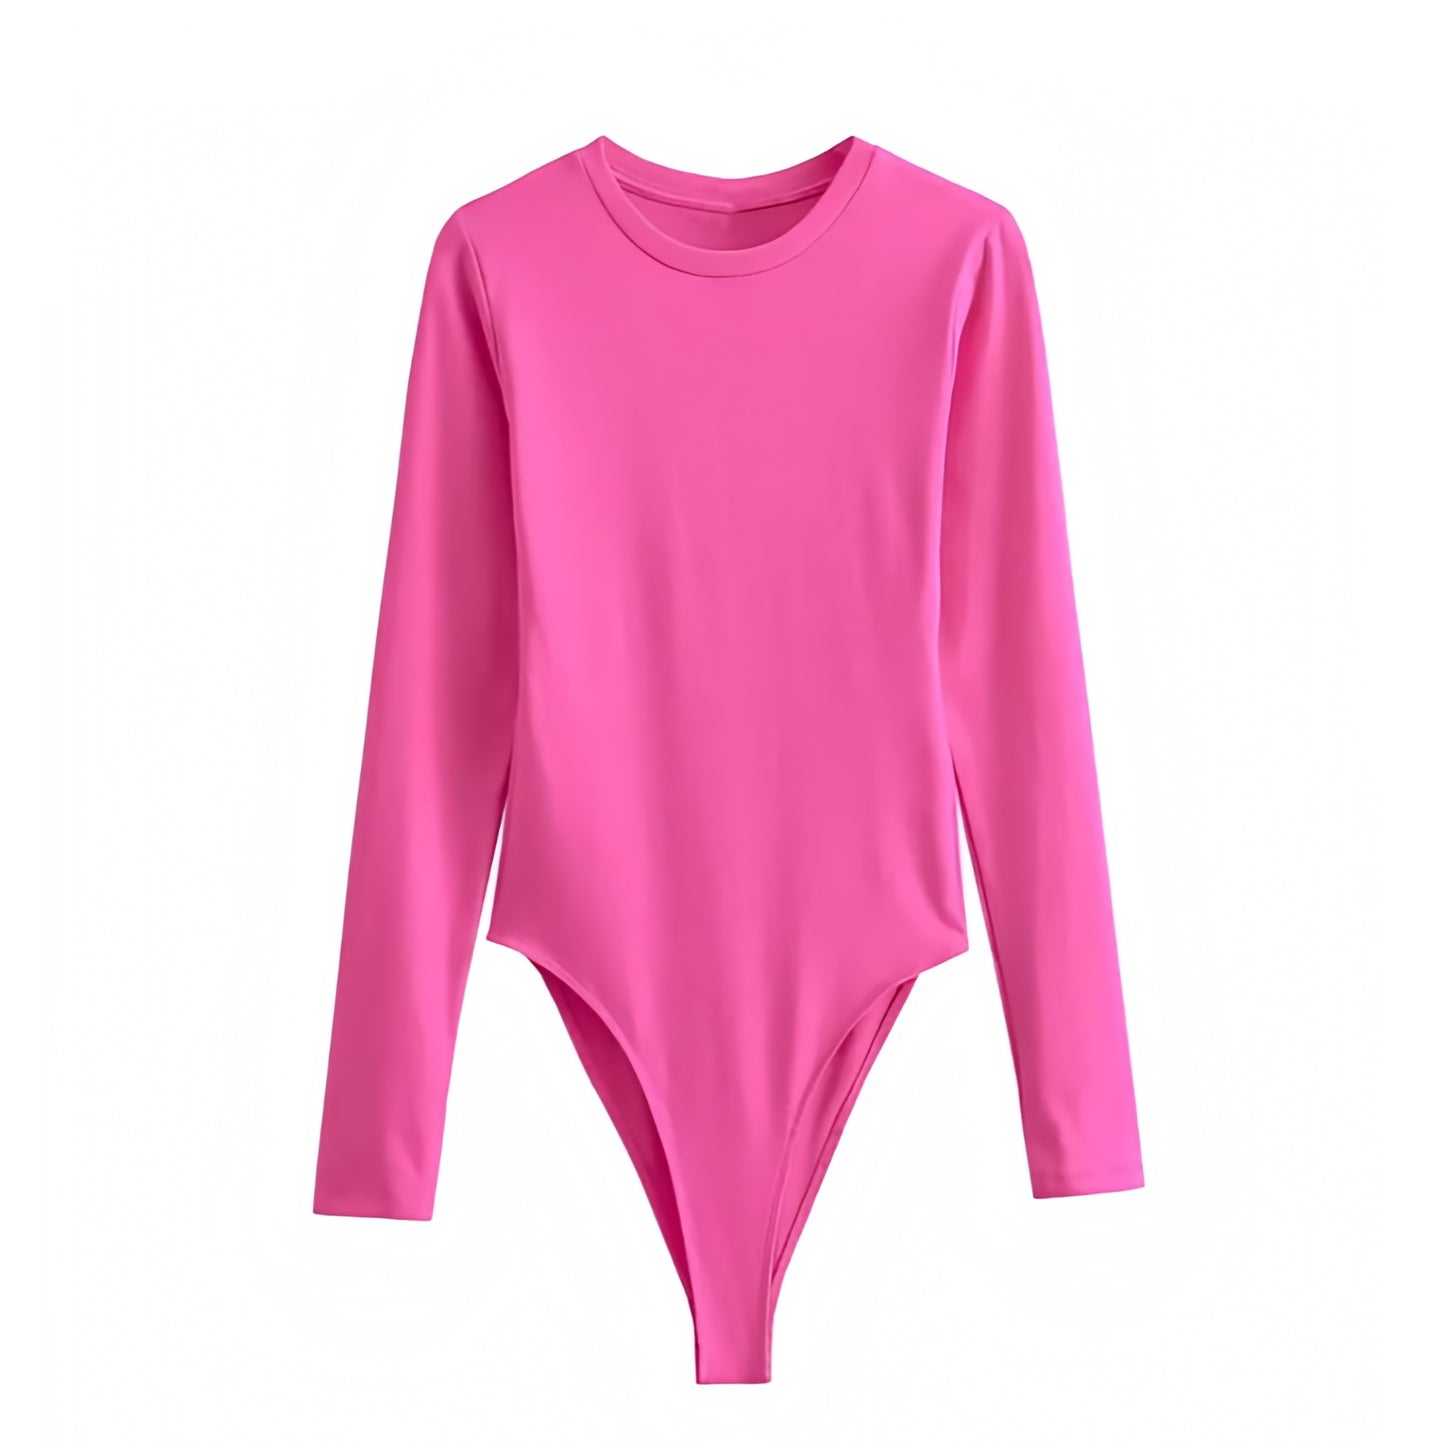 hot-bright-pink-cotton-bodycon-slim-tight-fitted-long-sleeve-round-neck-one-piece-bodysuit-top-under-shirt-comfy-cozy-stretchable-lounge-wear-women-ladies-spring-2024-summer-casual-chic-basic-preppy-style-essential-minimalist-sexy-spandex-feminine-skims-dupe-zara-revolve-aritzia